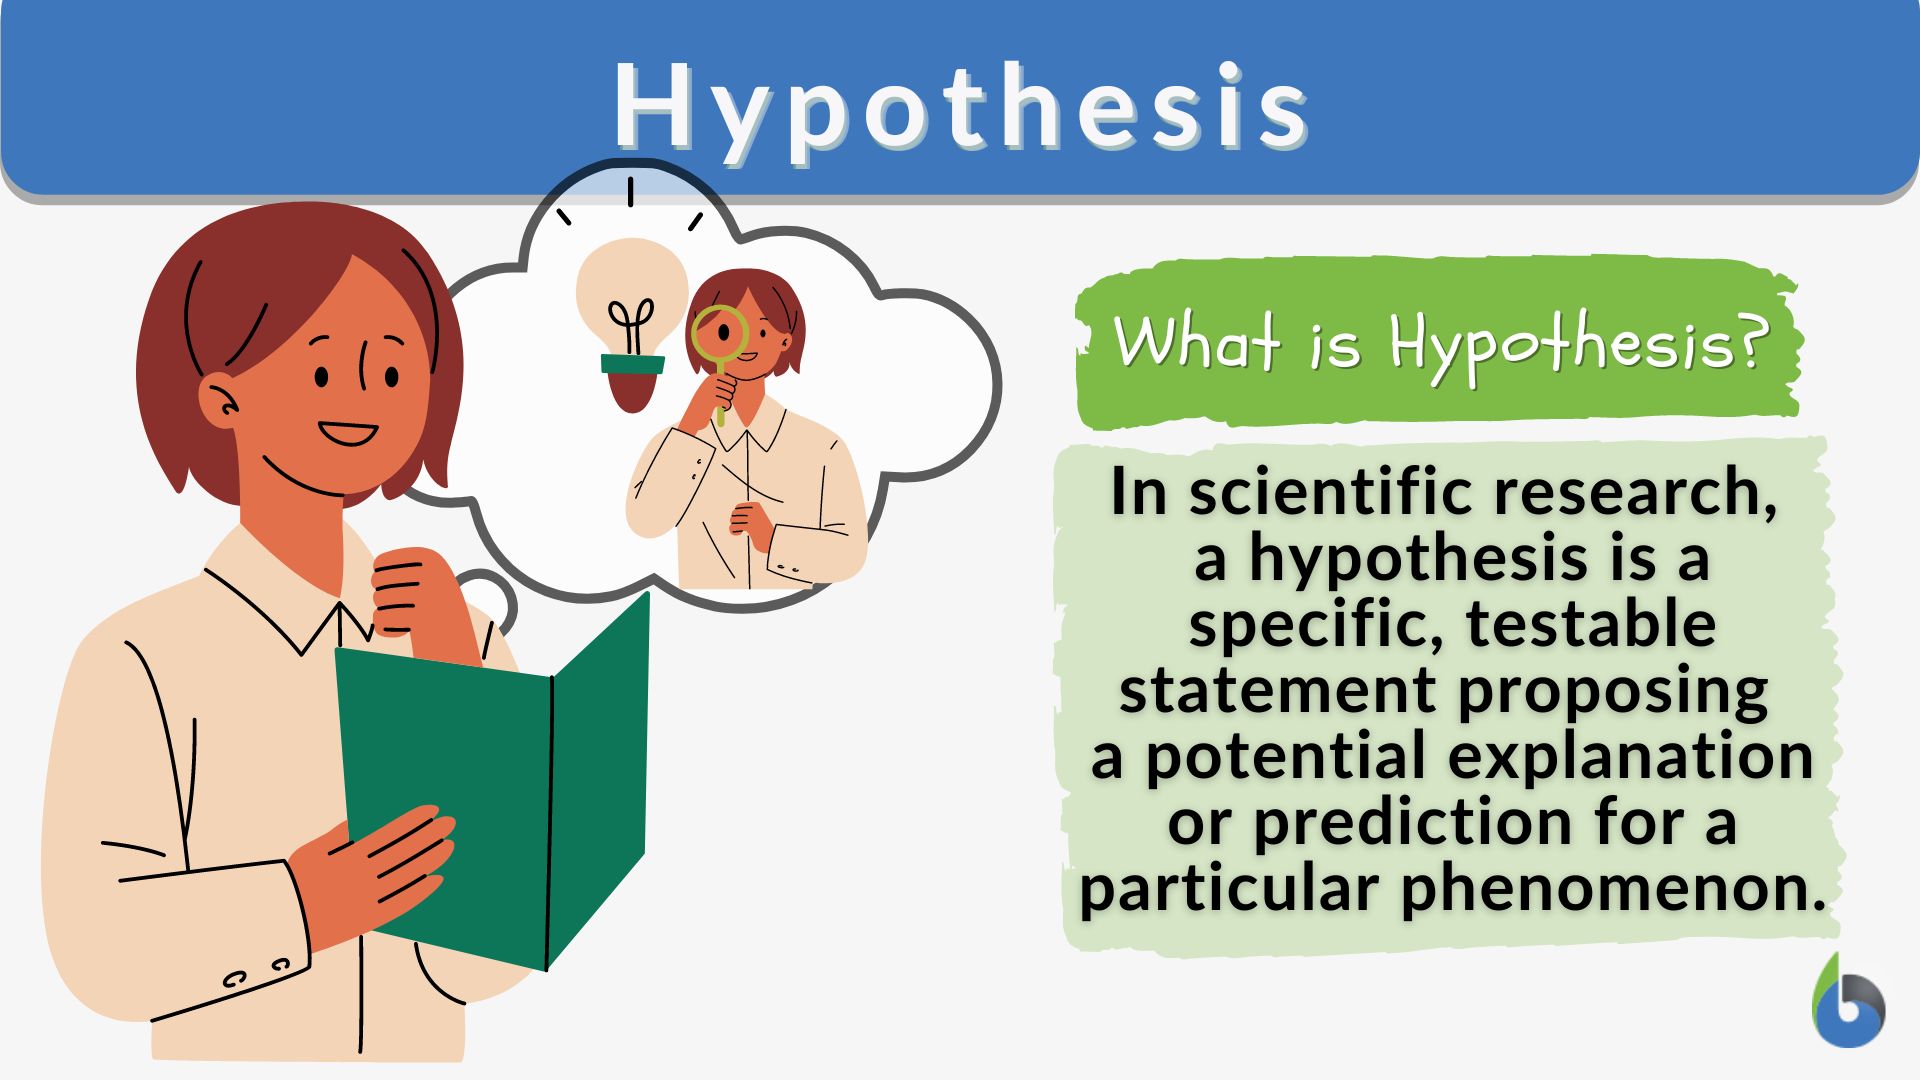 what is an example of a scientific hypothesis